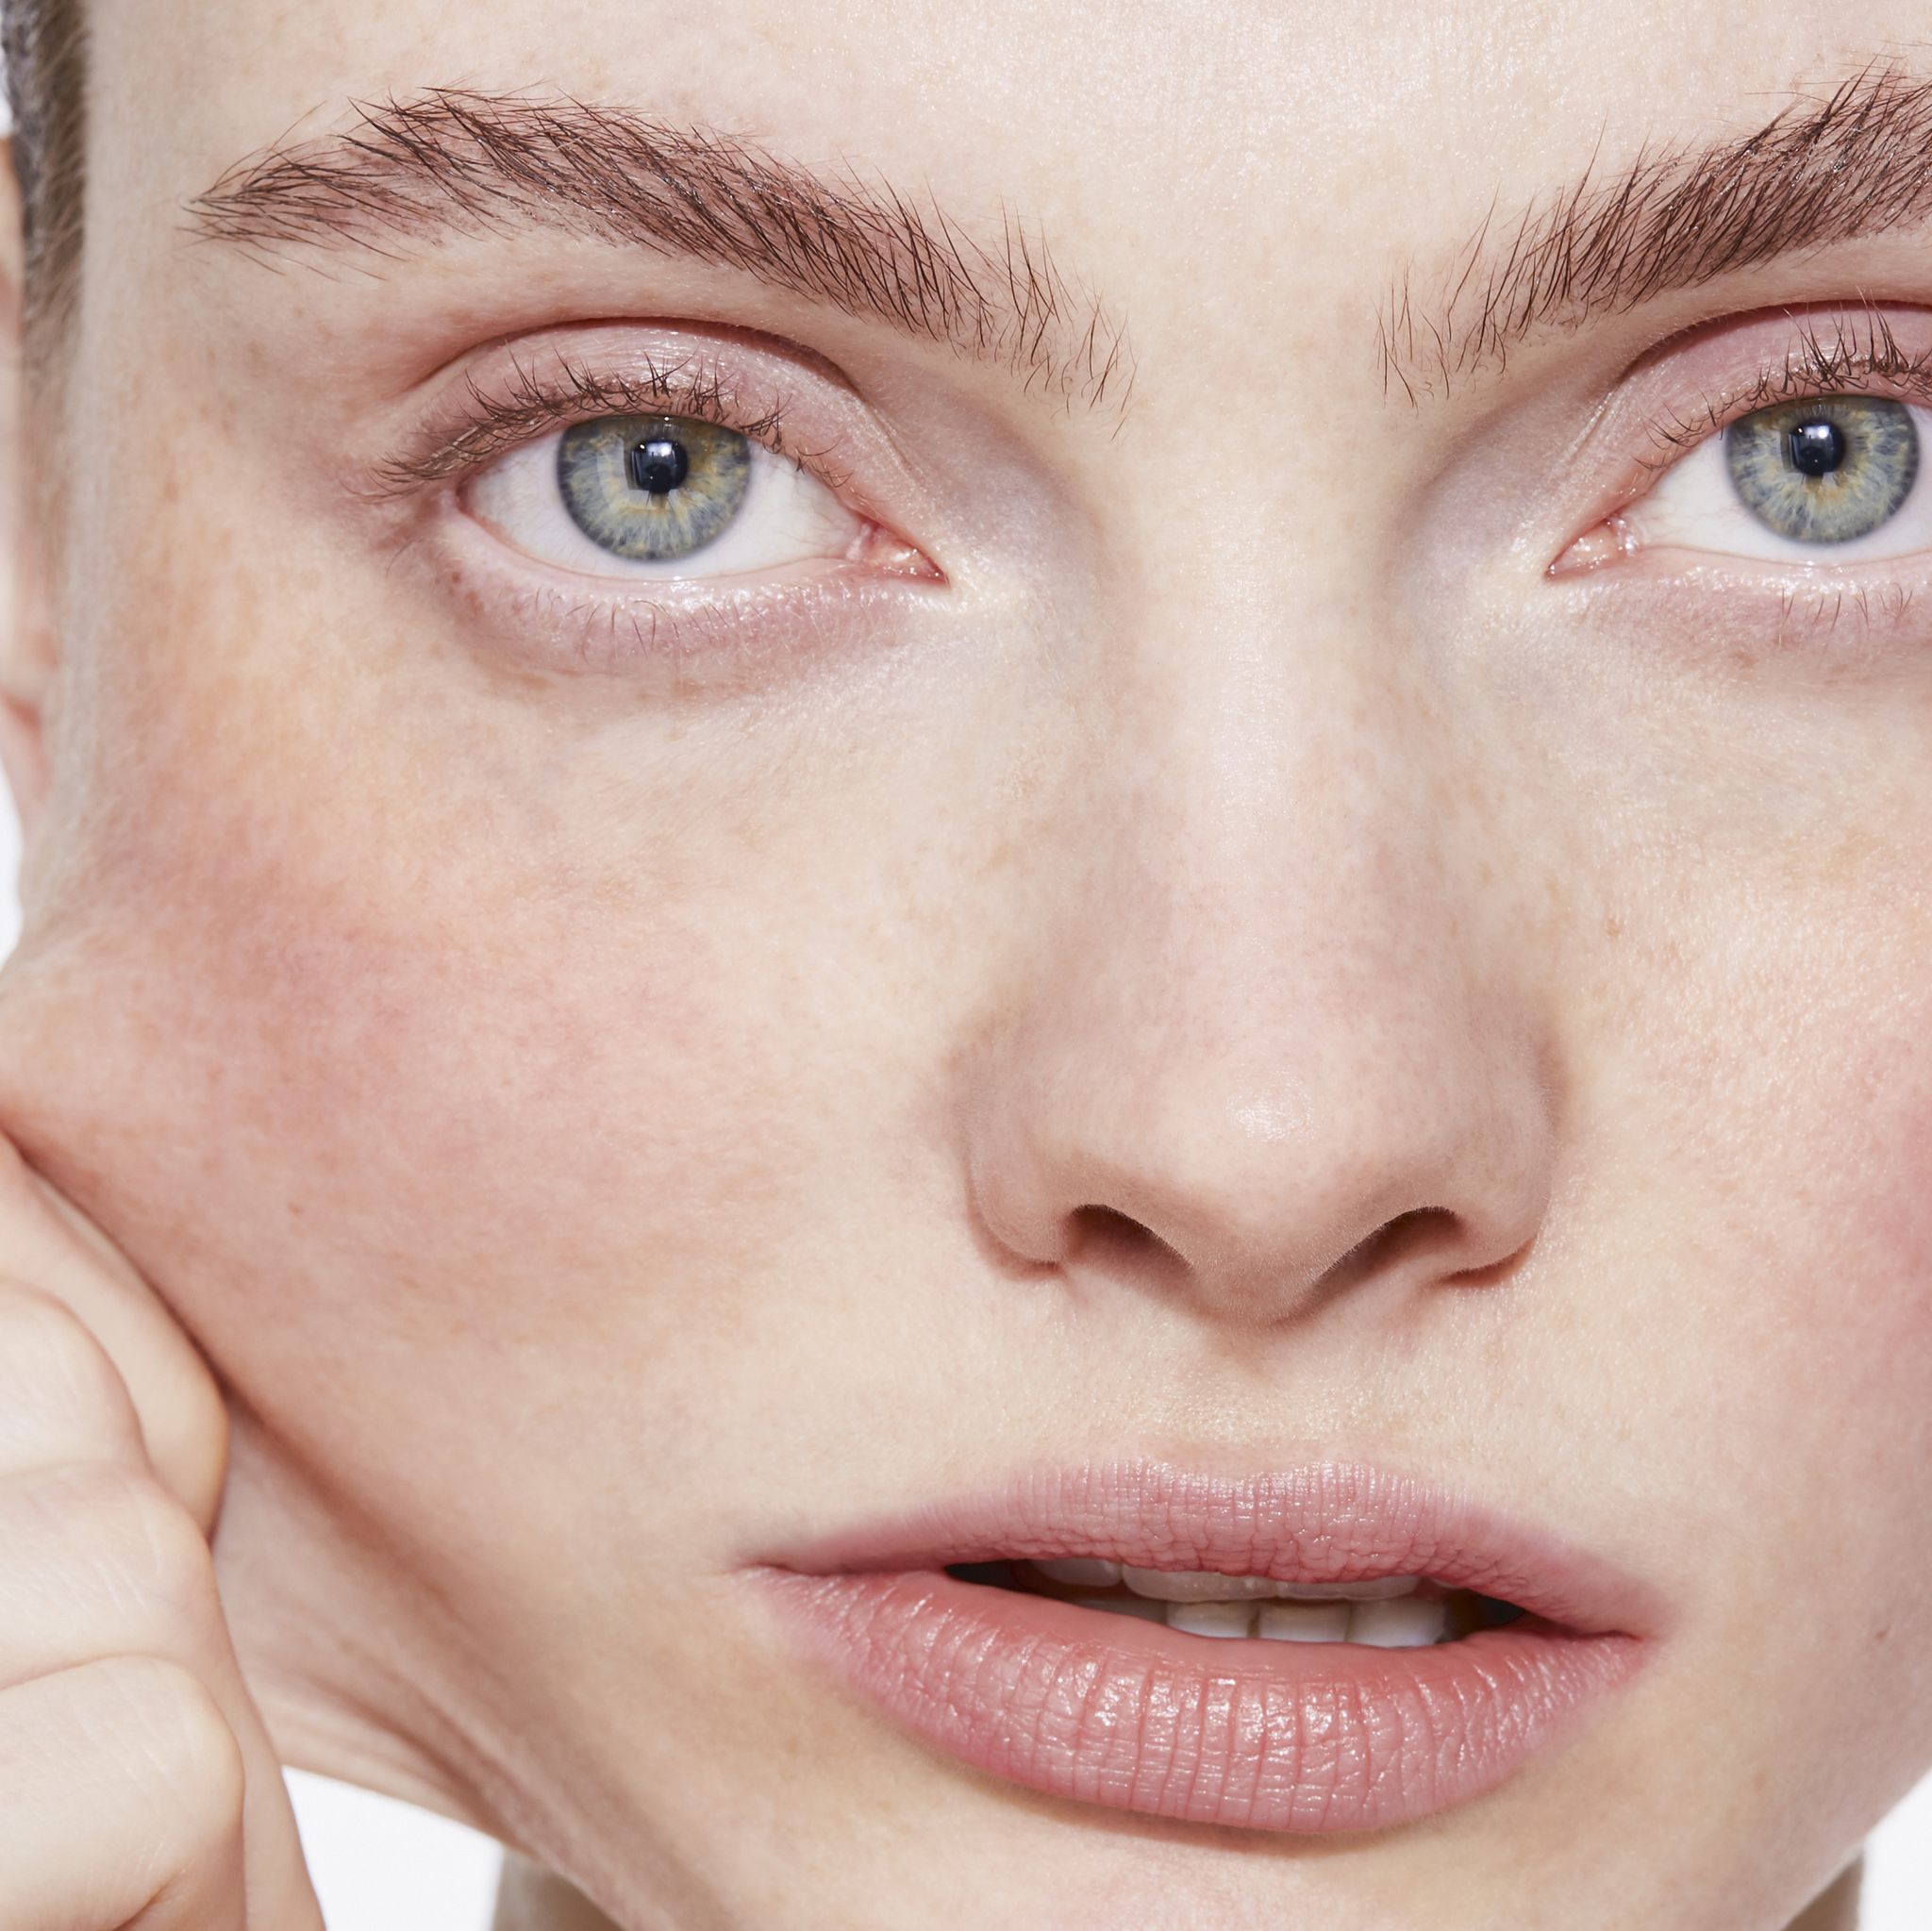 10 New Non-Surgical Beauty Beauty Procedures To Try In 2020